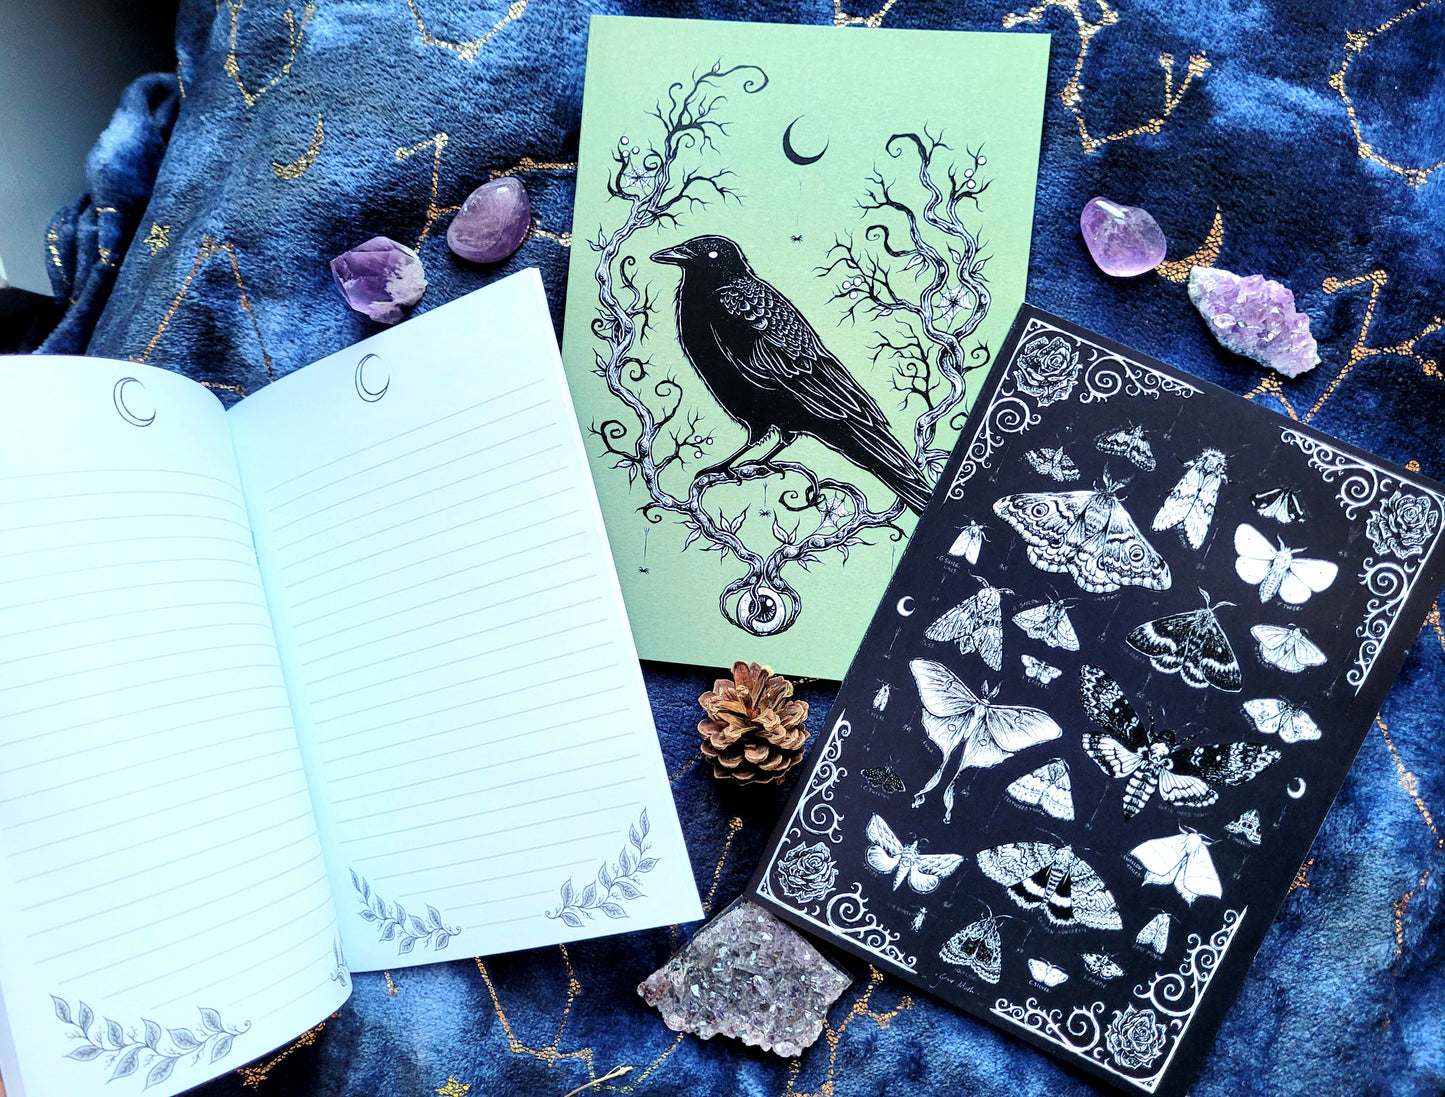 Crow Notebook - lined A5 size, 80 pages, professionally printed - by Grace Moth